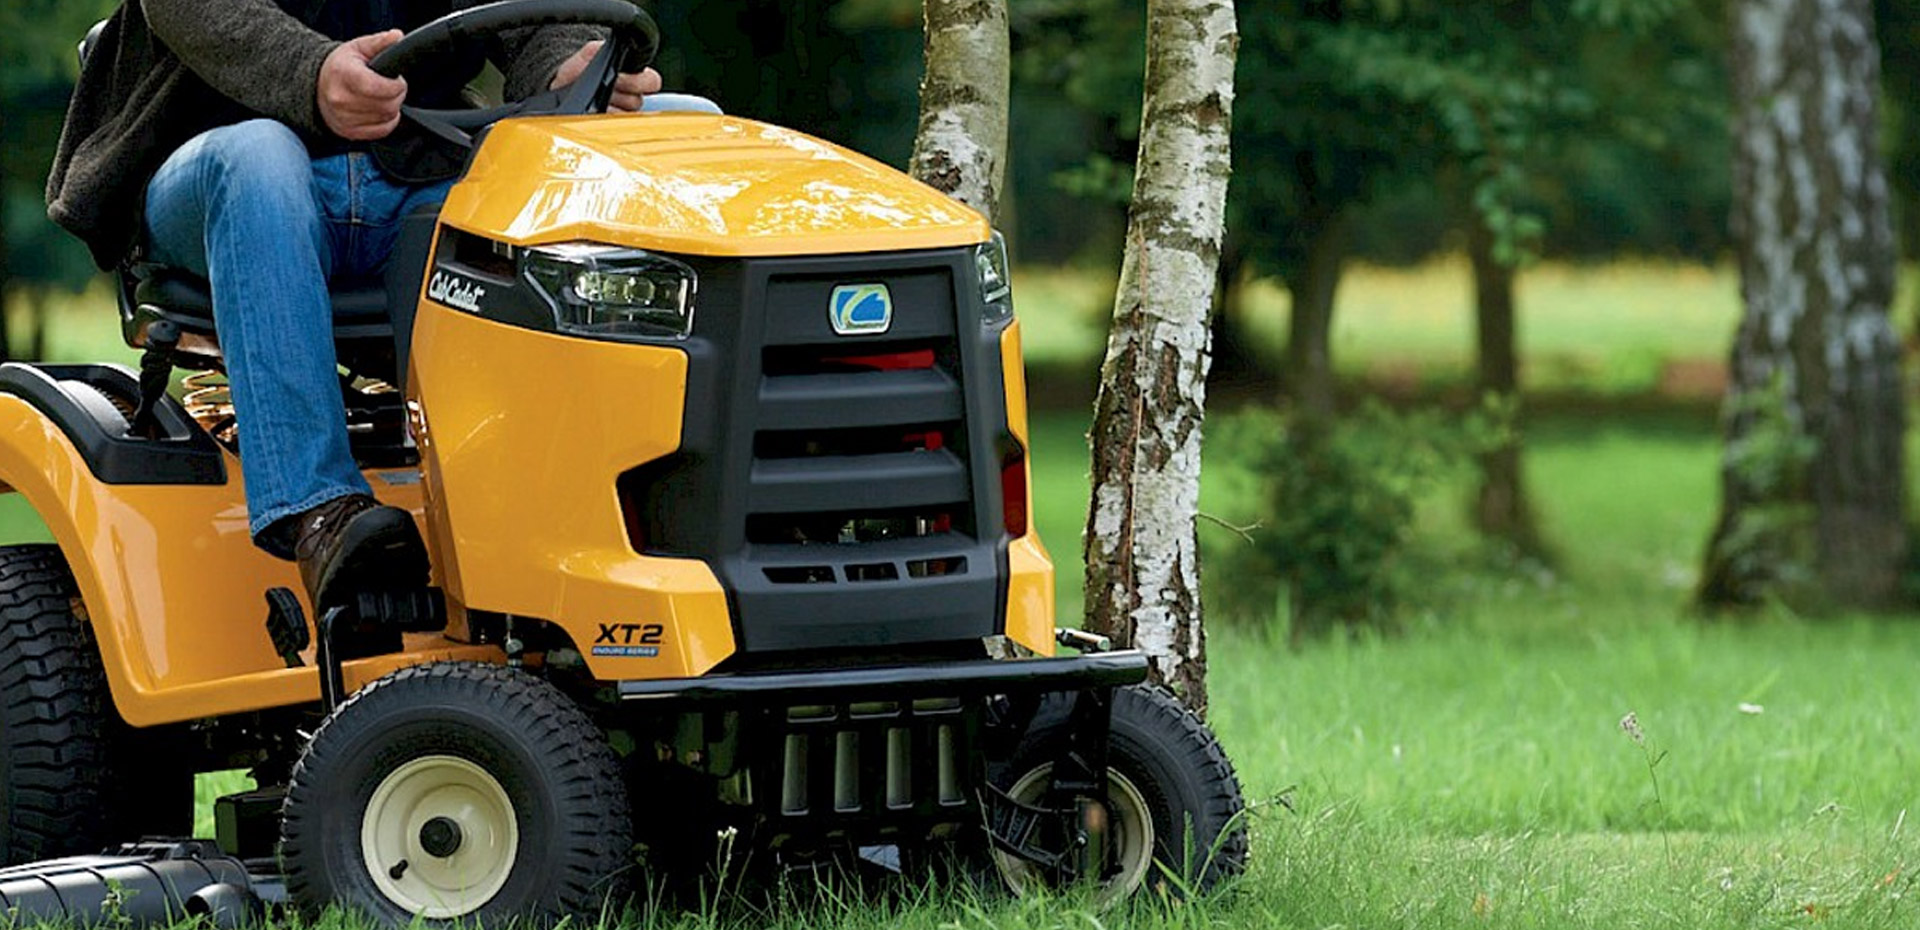 A Golf Club with a Garden Maintenance person on the Cub Cadet XZ2 mower.